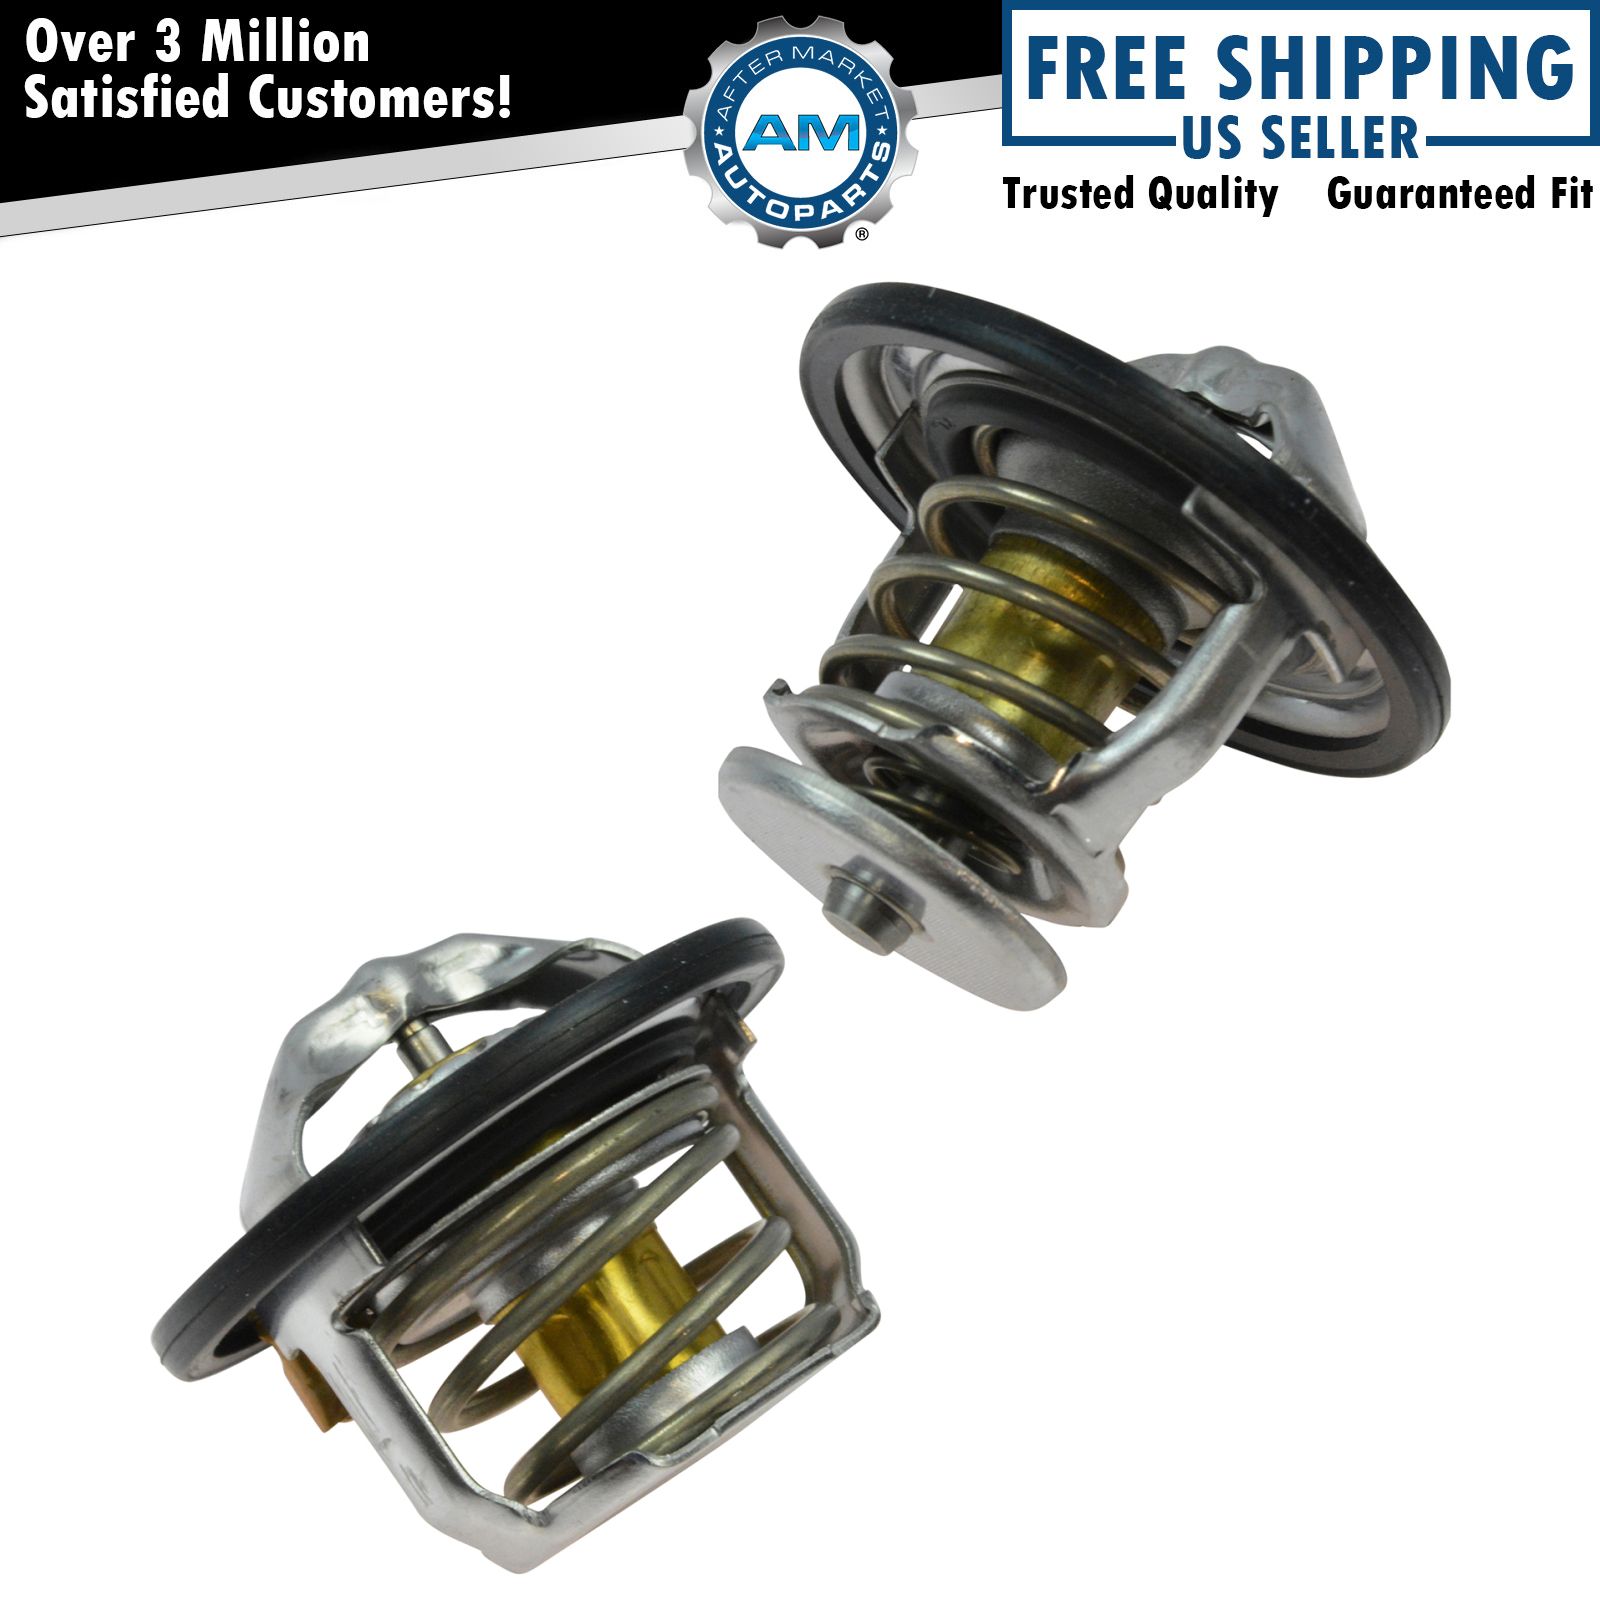 AC Delco 185 & 180 Degree Thermostat Front & Rear Kit Pair for GM Pickup Duramax